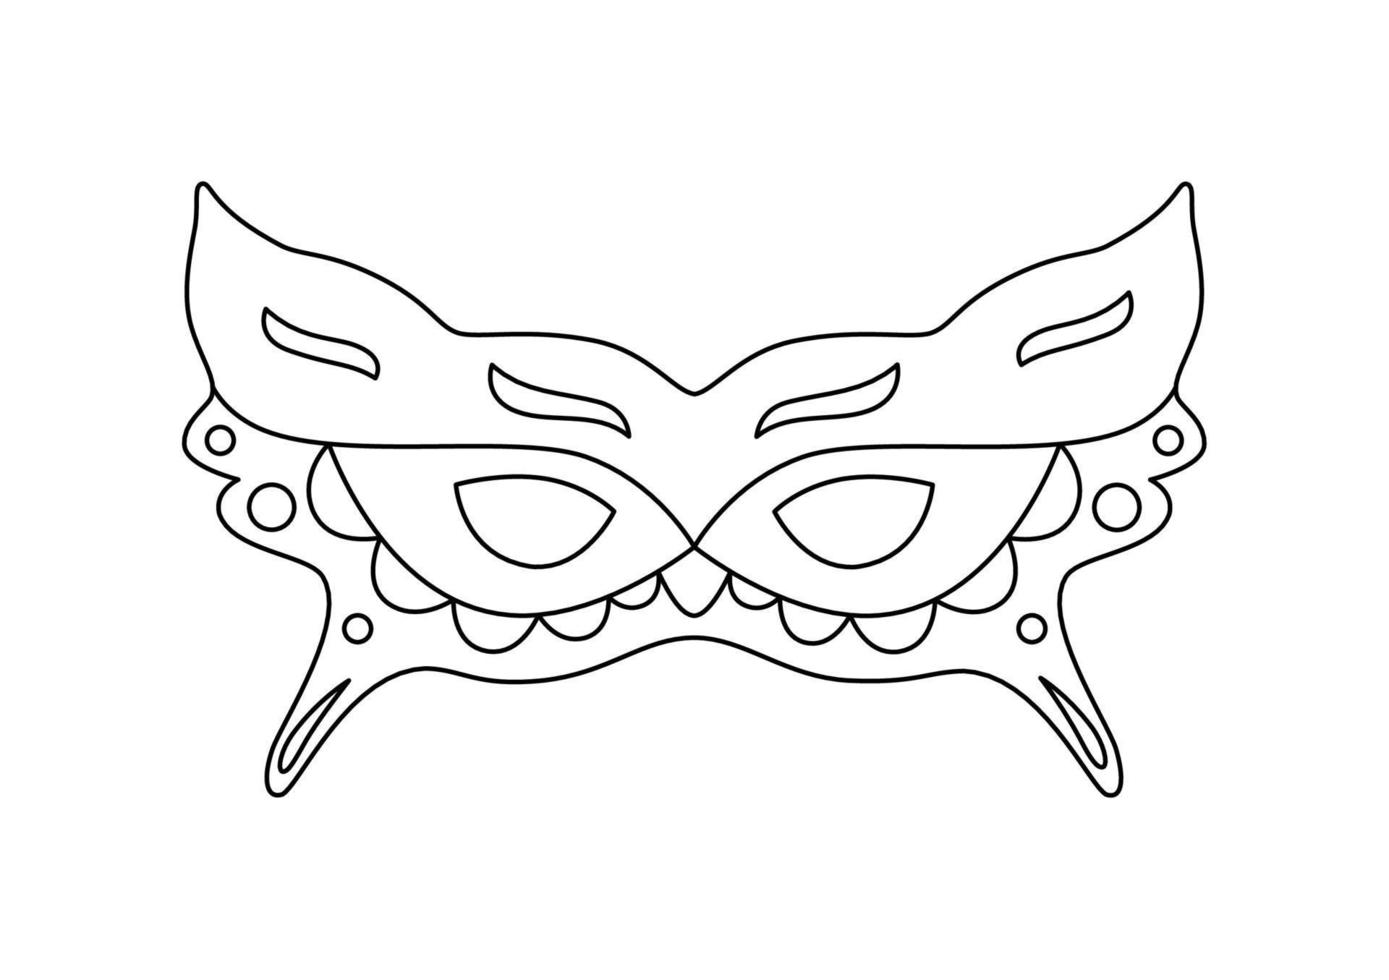 Carnival mask lineart vector illustration.  Disguise contour coloring page. Festival costume element. Holiday decoraion.